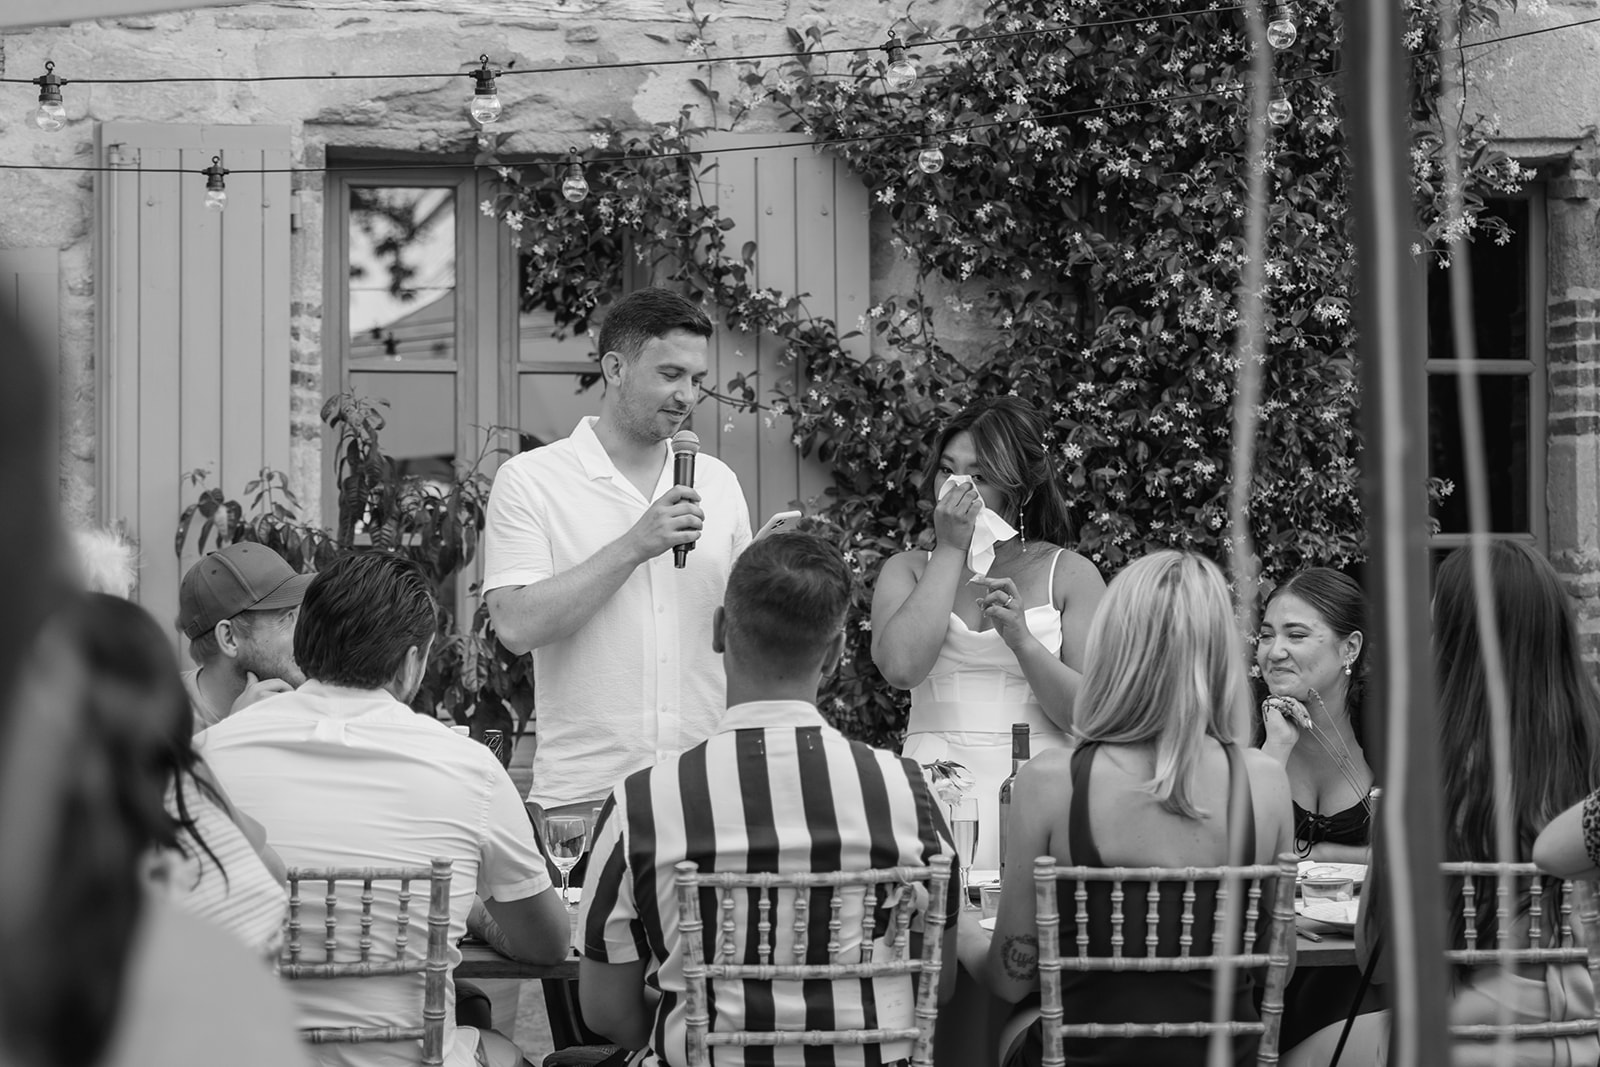 Speeches at reception at a France Destination Wedding. Photography and Videography by Olive Joy Photography